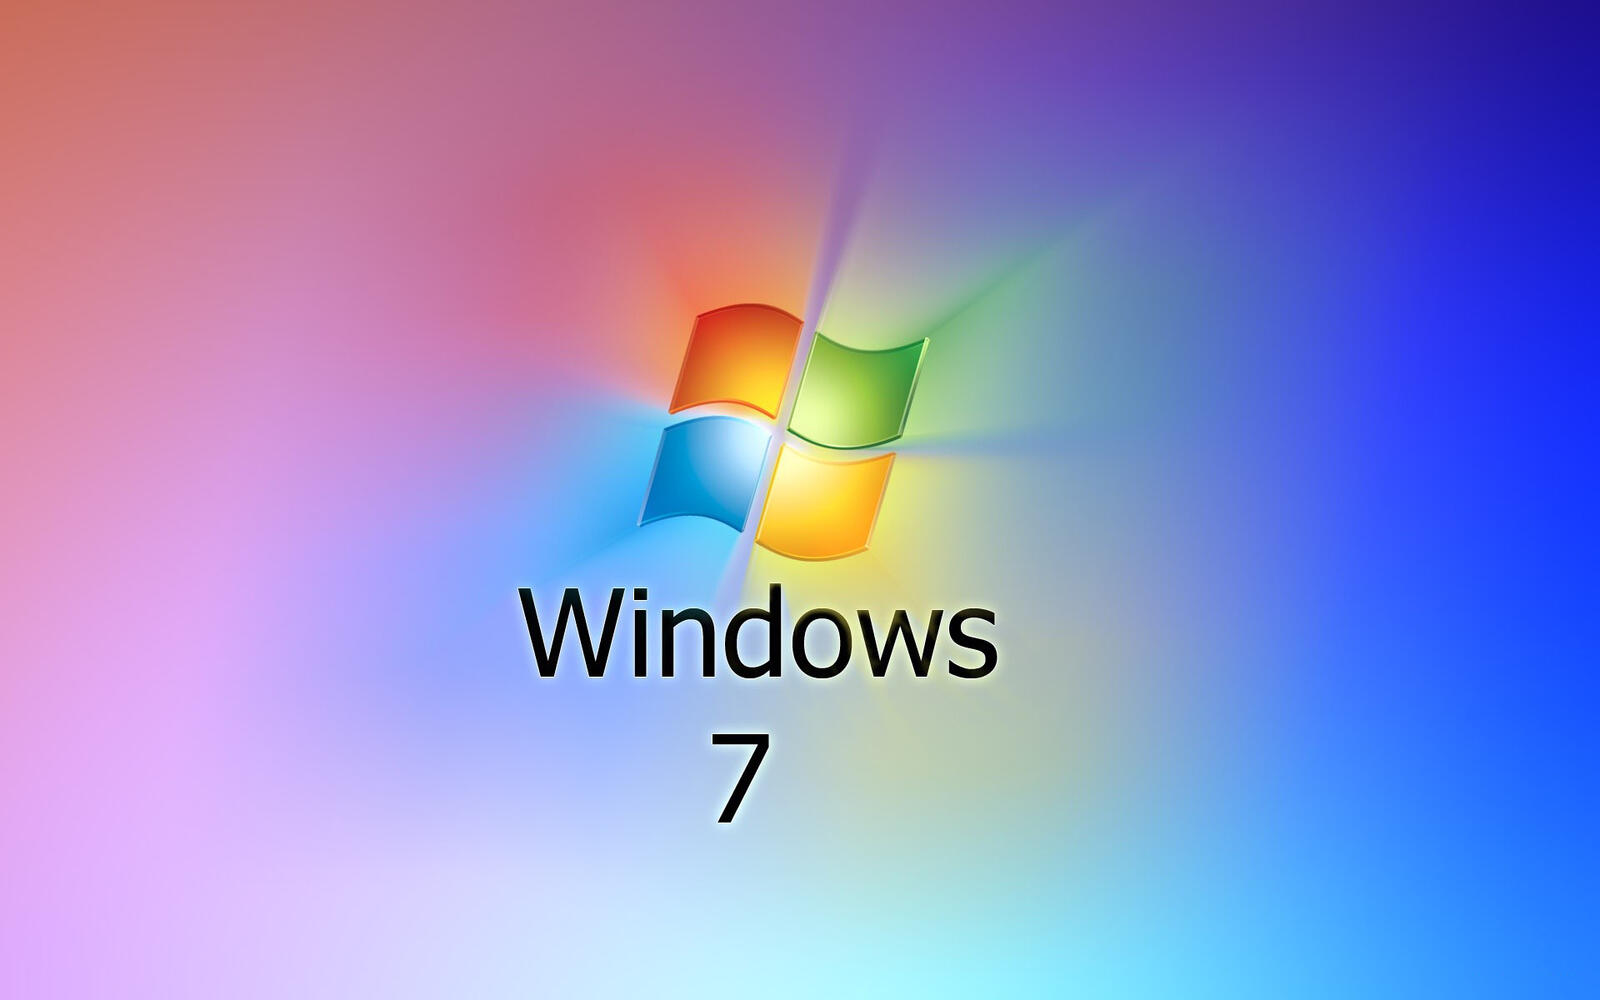 Wallpapers windows 7 operating system icon on the desktop